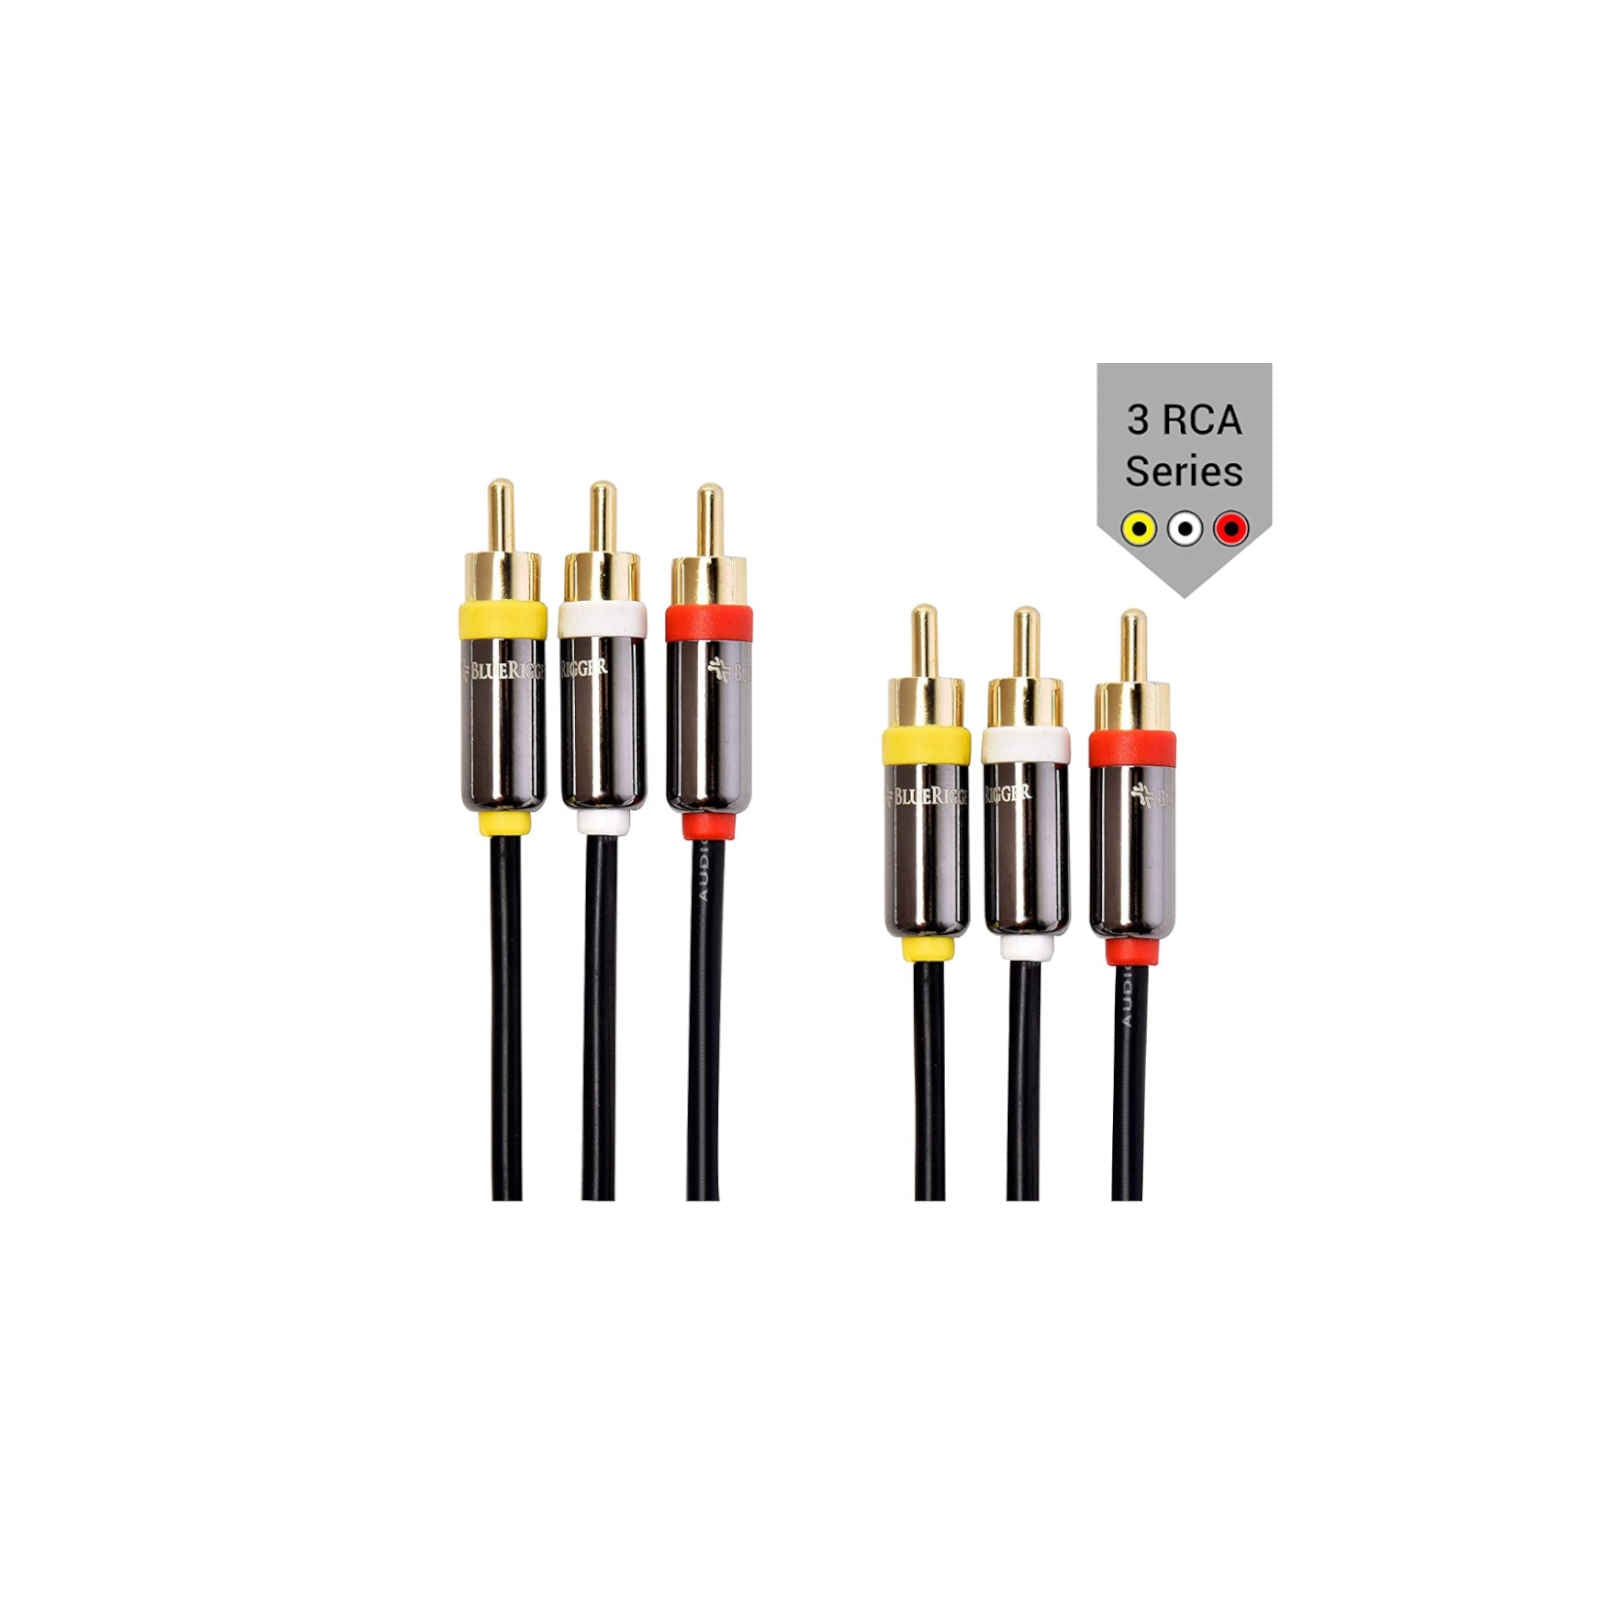 BlueRigger RCA Stereo Cable - 3 x RCA Male to 3 x RCA Male Audio Cable (6ft /10ft /15ft)